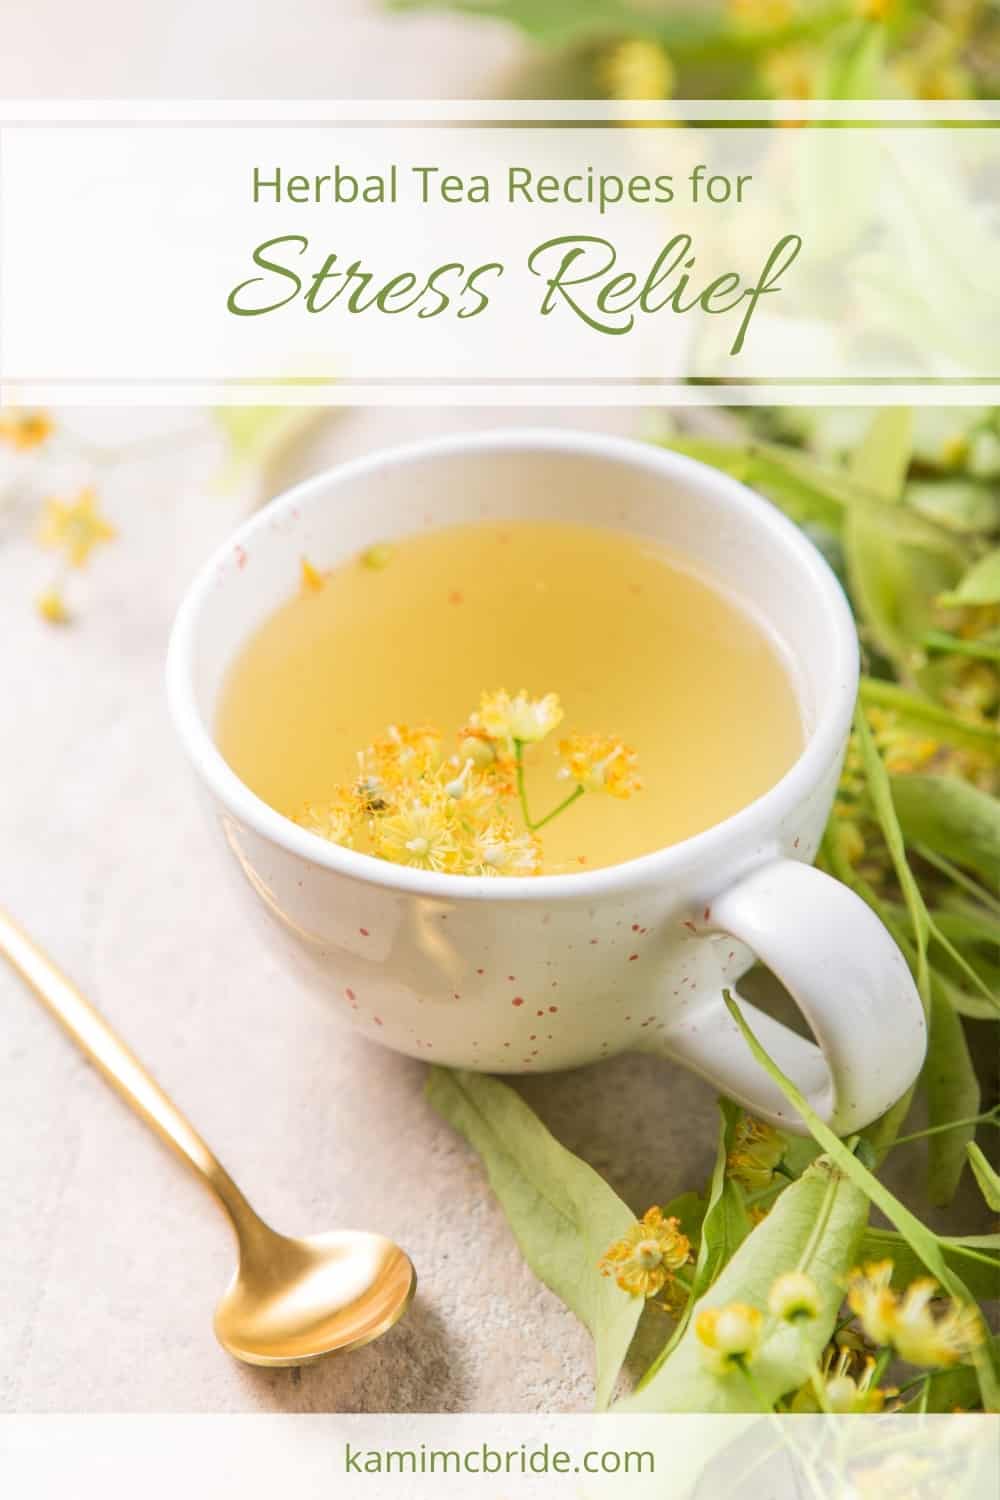 Herbal Tea Recipes for Stress Relief